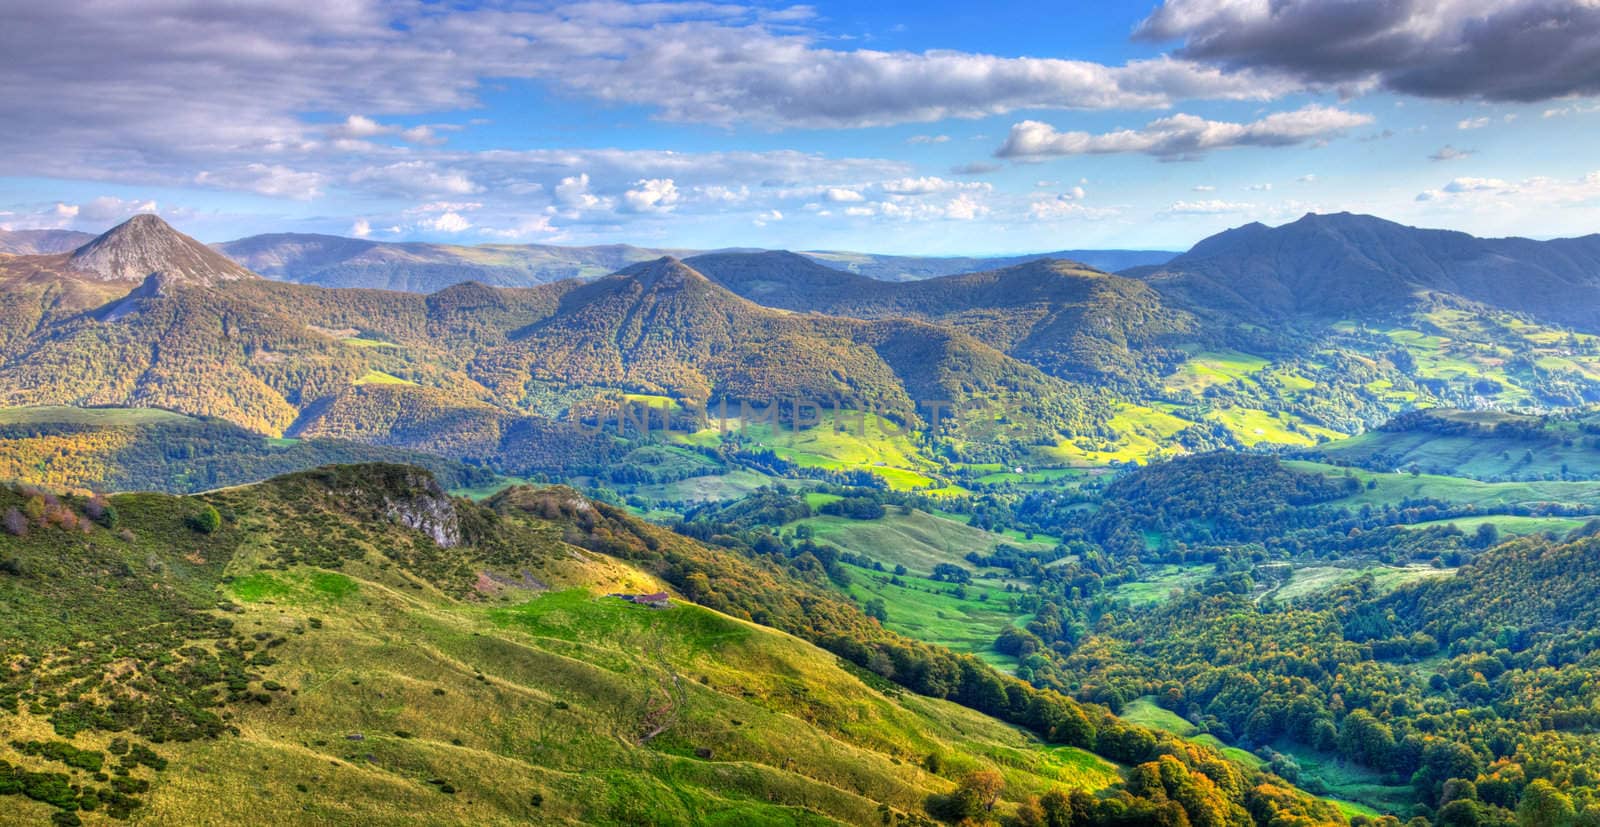 Beautiful panorama of the peaks, plateaus and valleys in Auvergne (Cantal) in The Central Massif located in south-central France.This region contains the largest concentration of extinct volcanoes in the world.